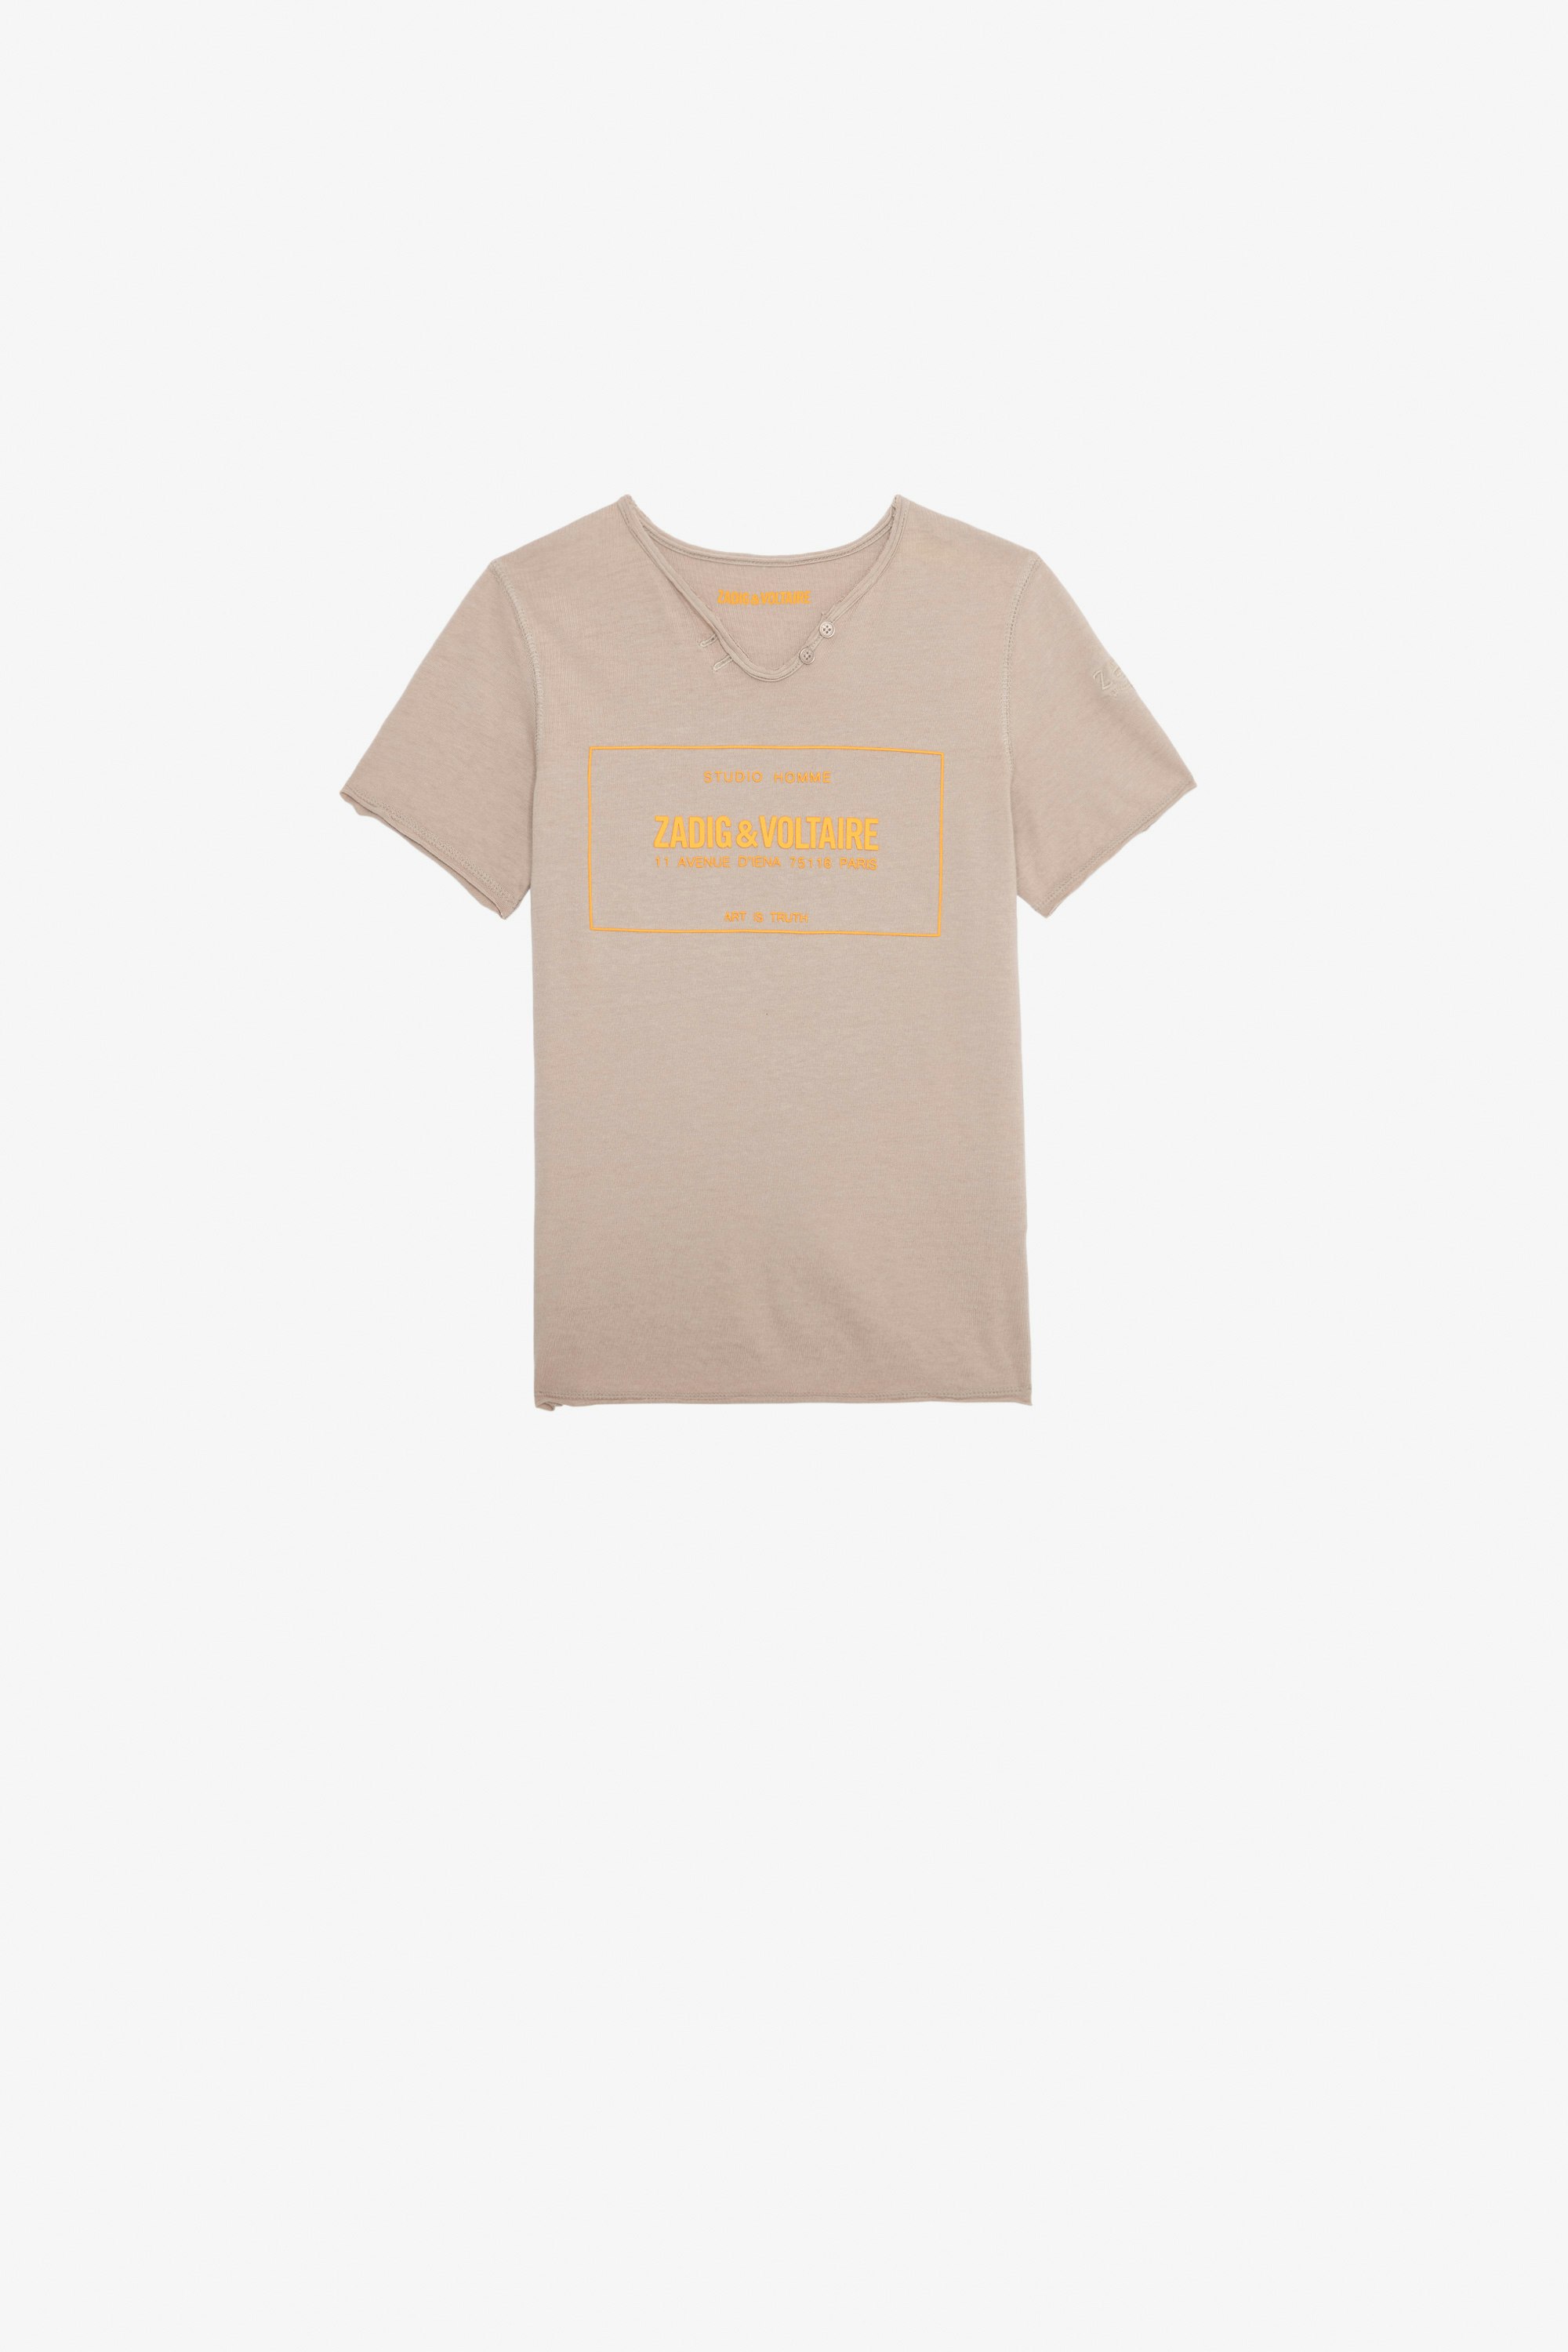 Boxer Boys’ T-Shirt Boys’ beige short-sleeved cotton jersey T-shirt with studio insignia.